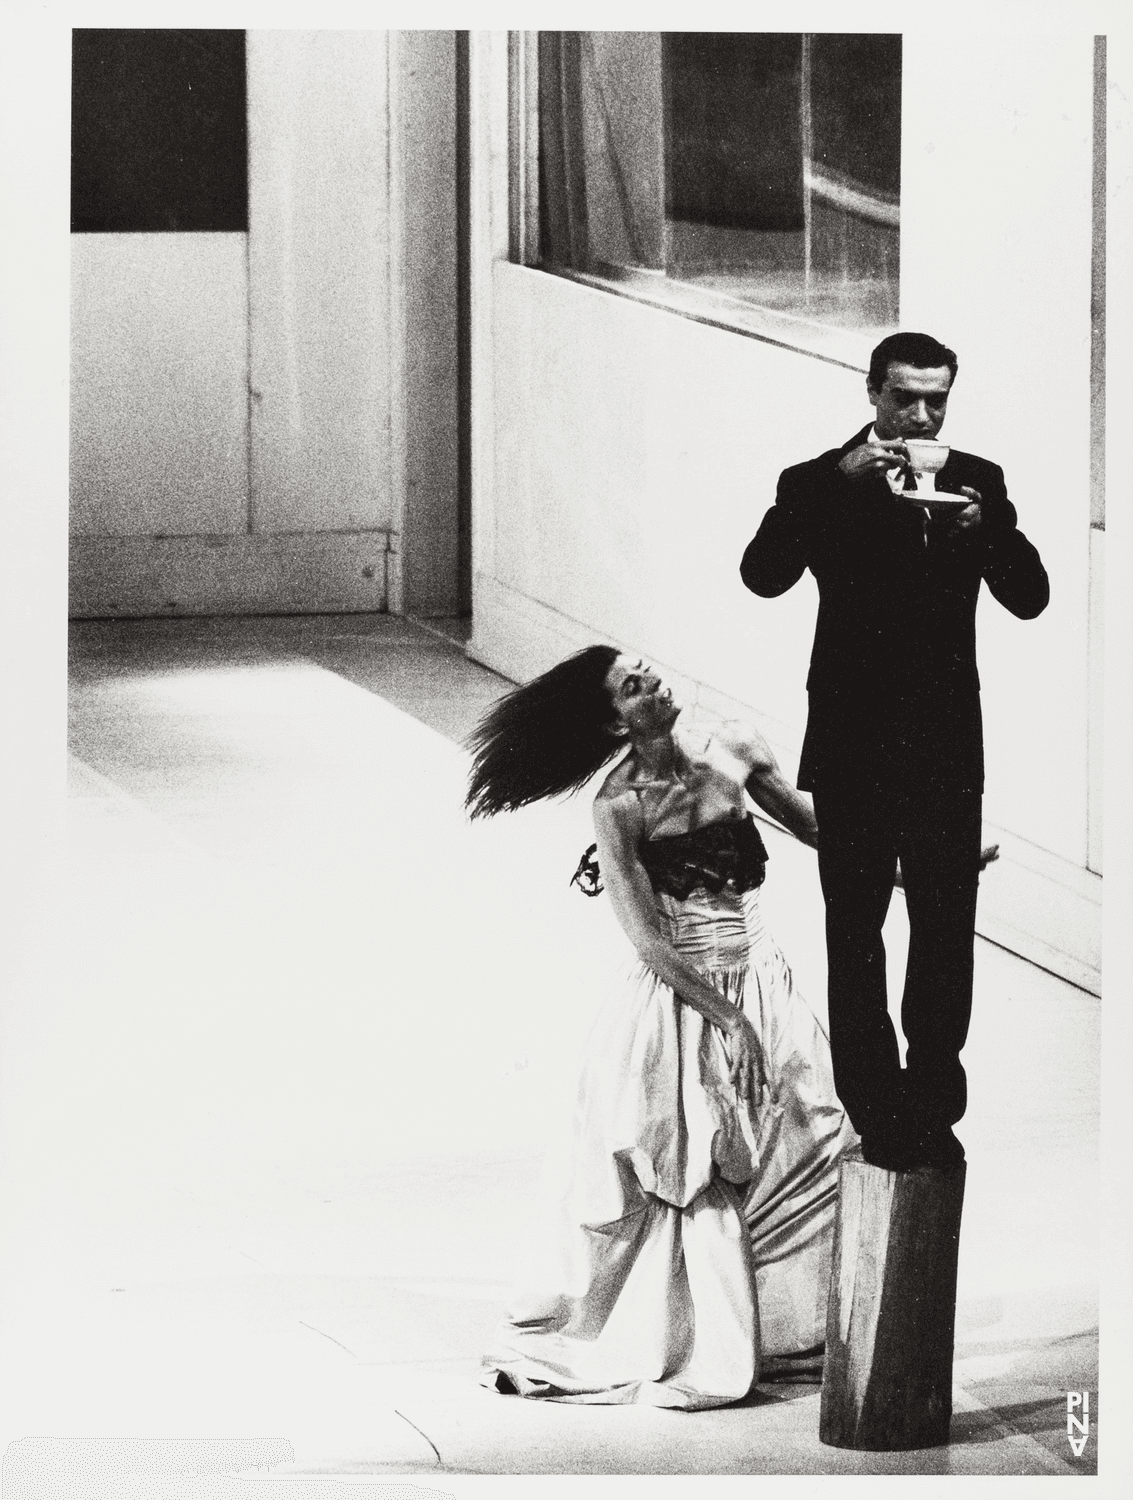 Antonio Carallo and Héléna Pikon in “Two Cigarettes in the Dark” by Pina Bausch